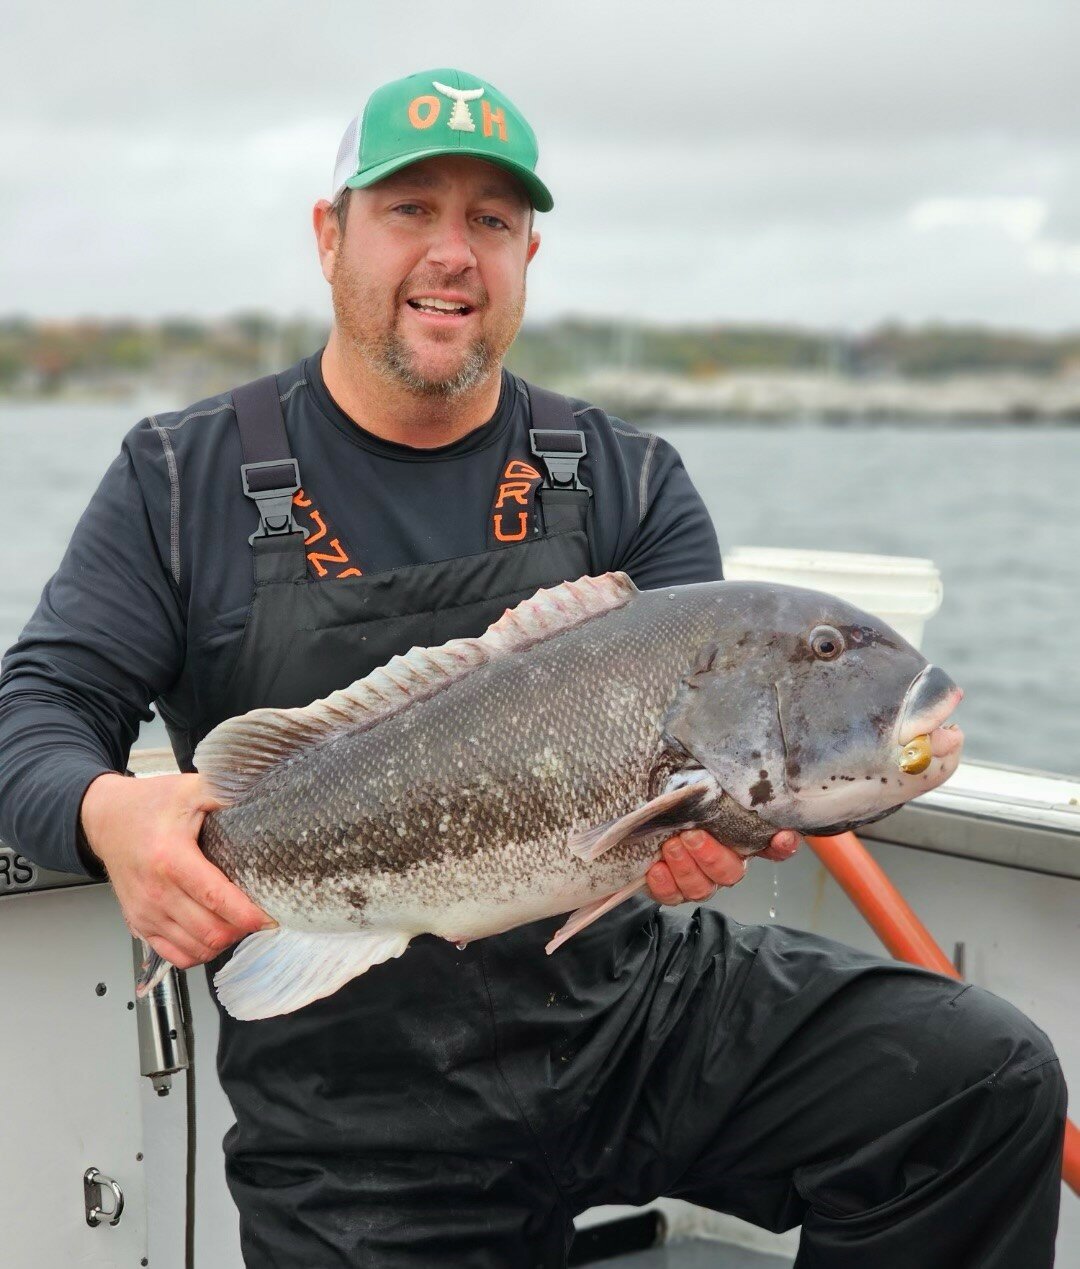 Anglers working with Congress, and great fishing continues    - News, Opinion, Things to Do in the East Bay